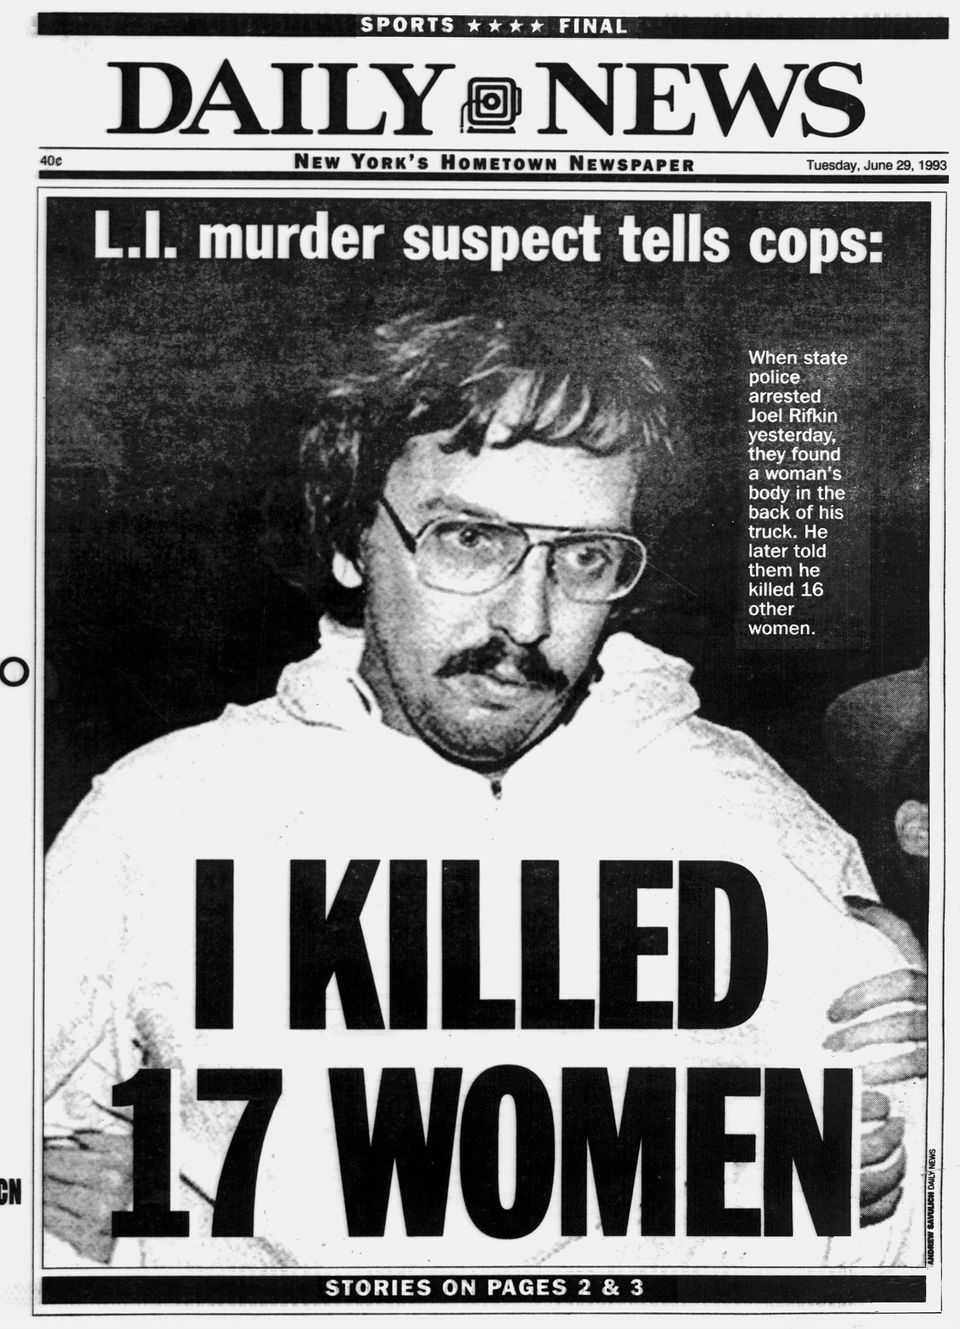 Daily News Frontpage dated June 29, 1993, L.I. murder suspec